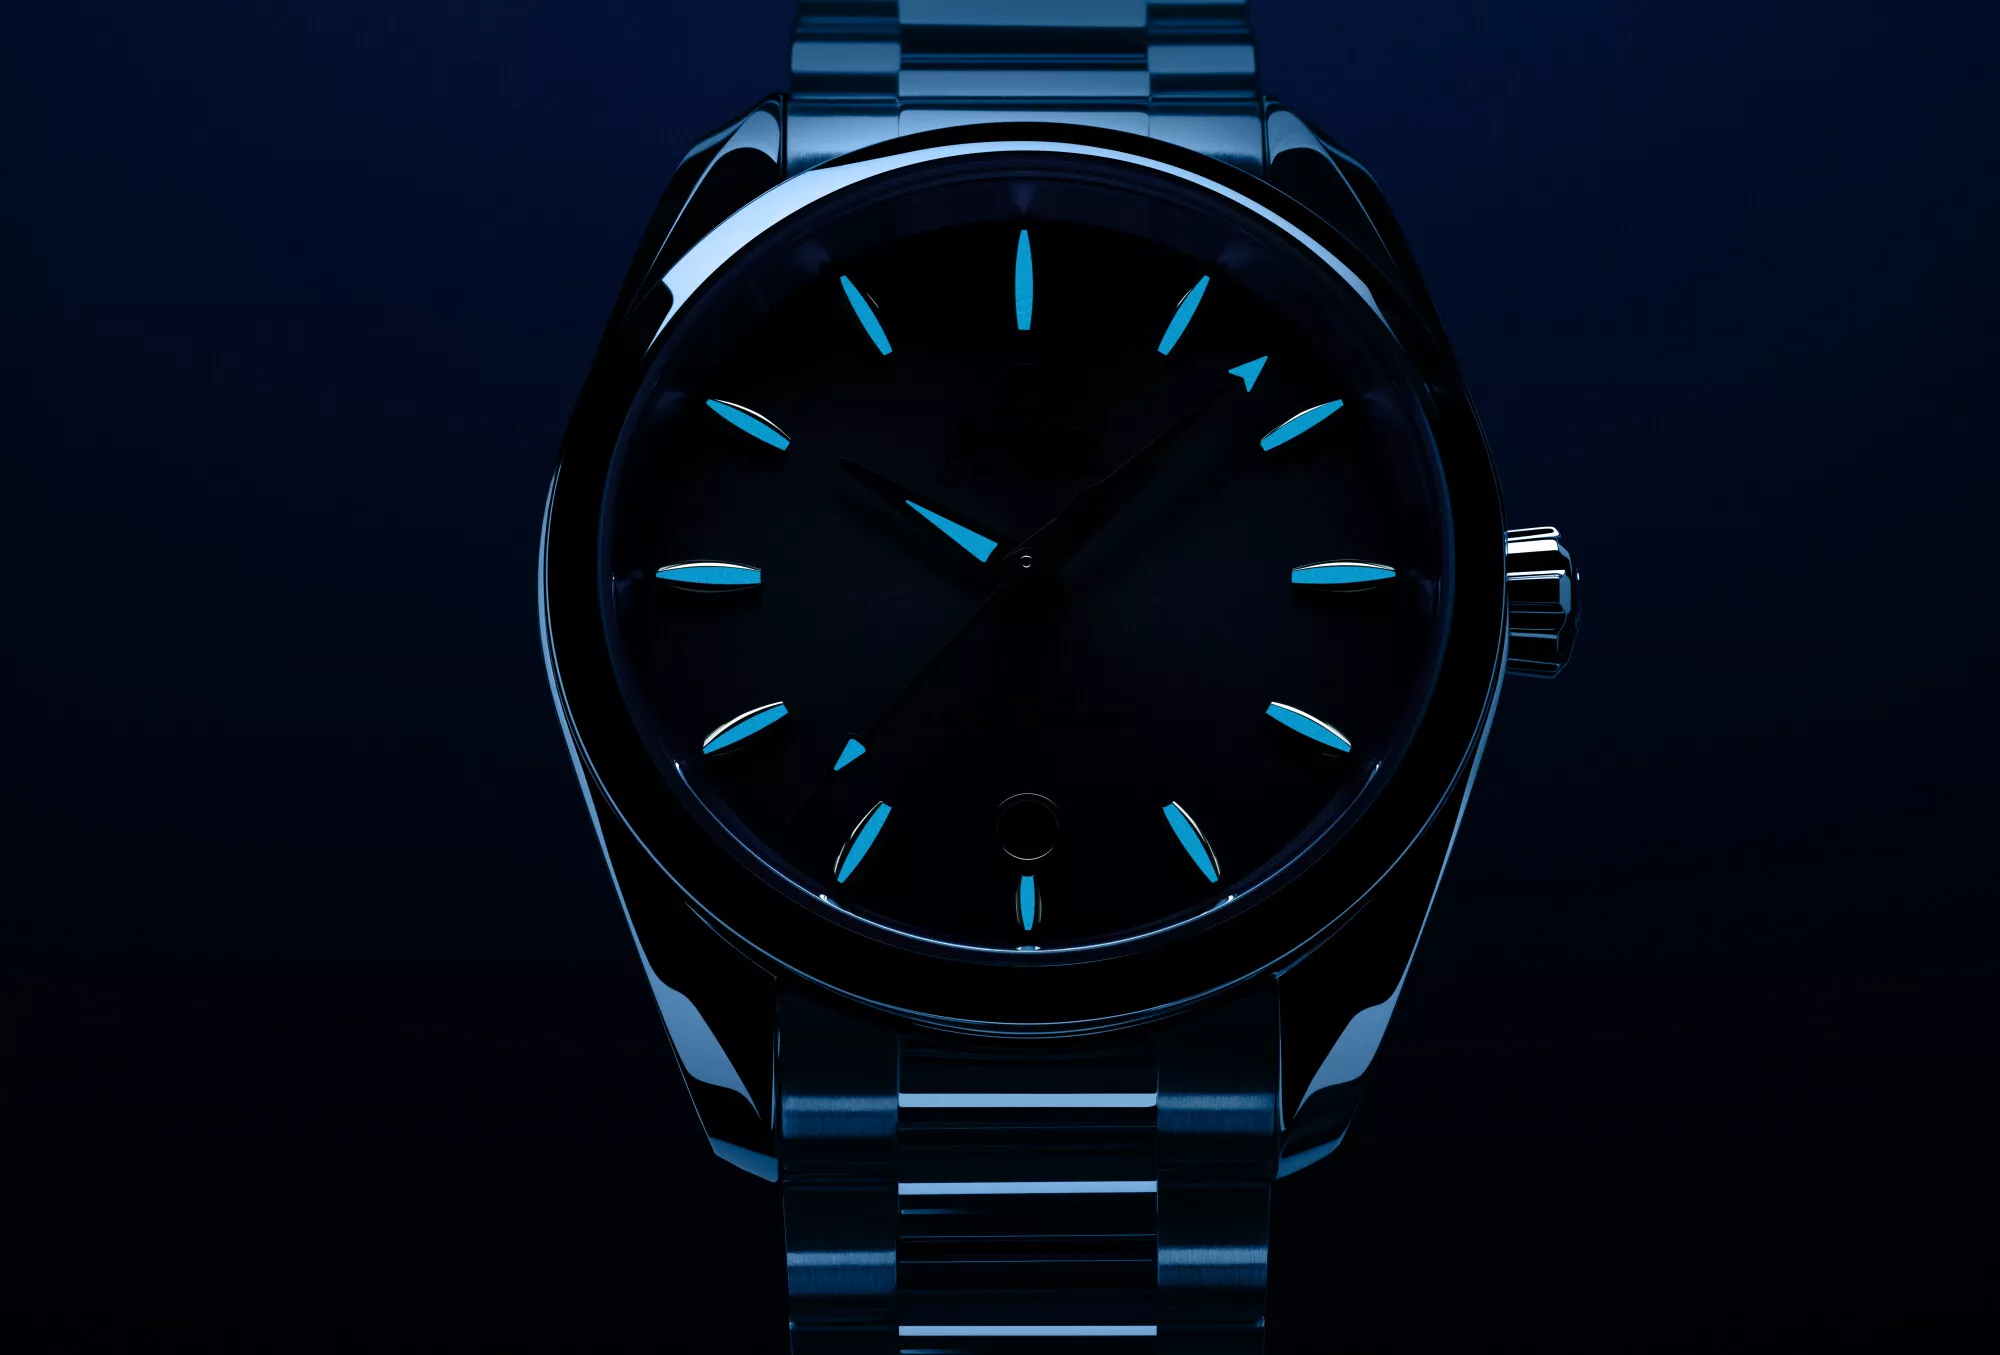 Seamaster: Precision at Every Level